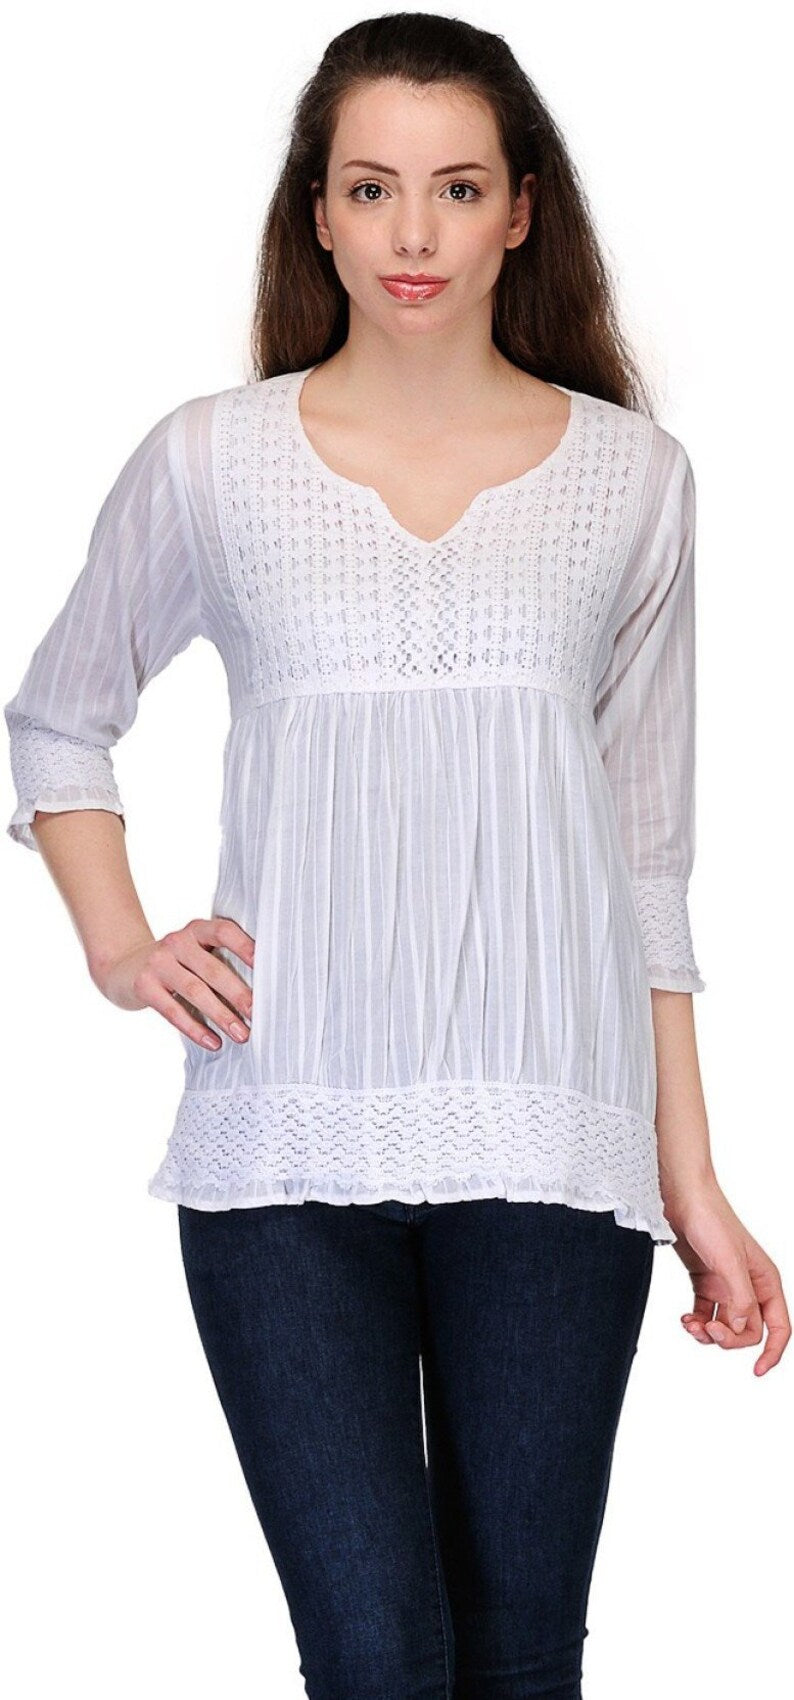 White Cotton Lace Top For Women , Chest 38 Inches  , FREE  DELIVERY